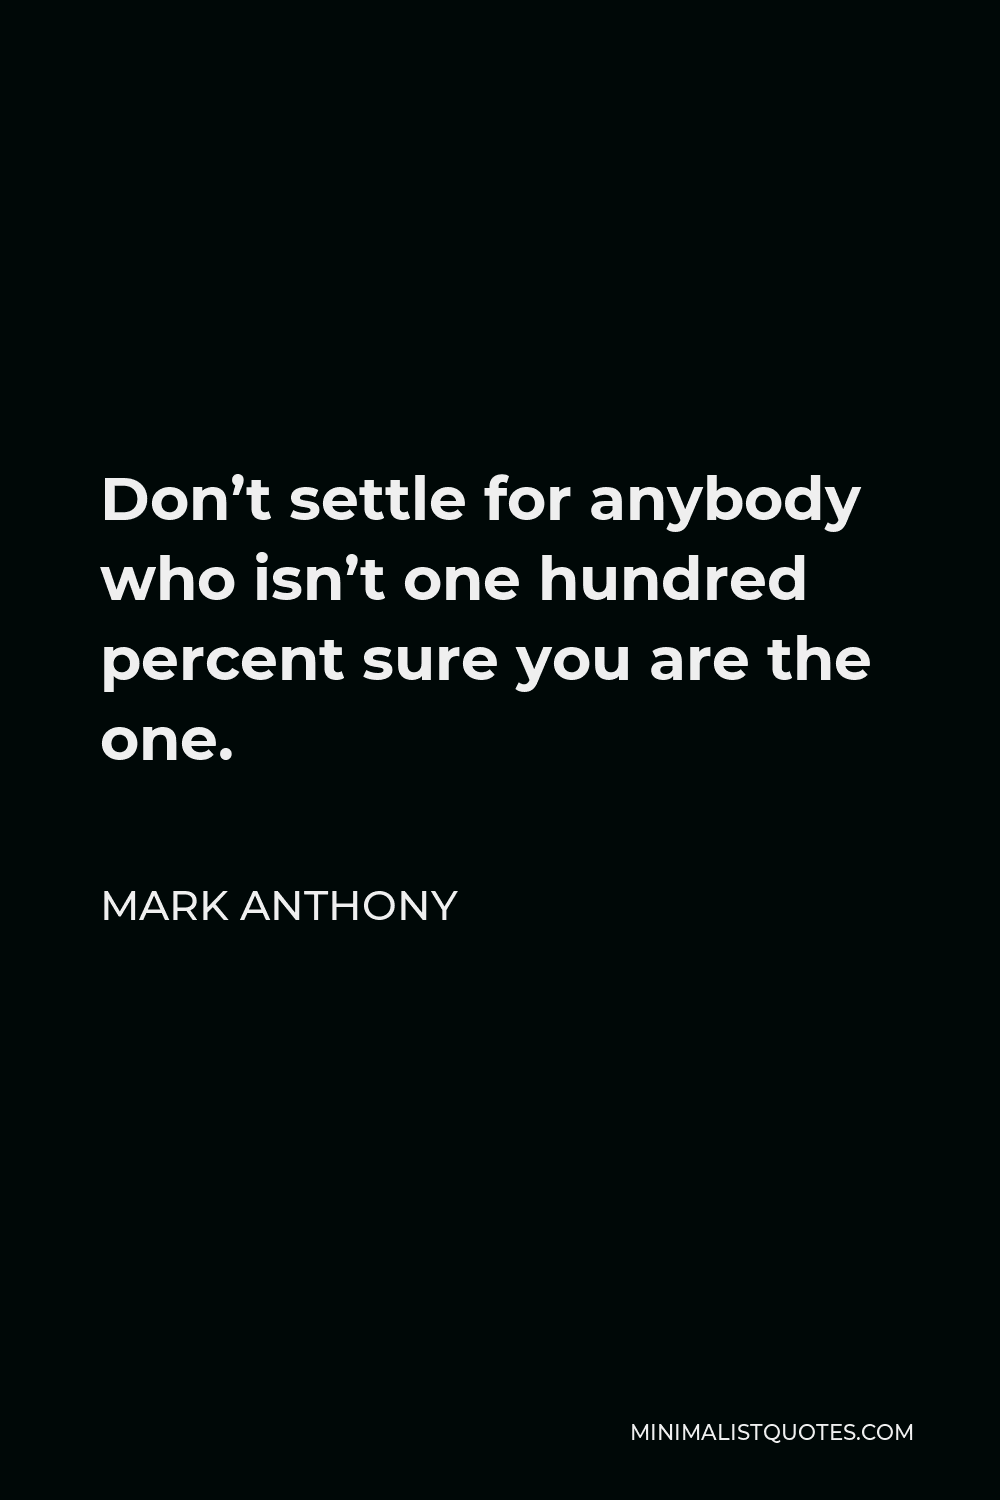 Mark Anthony Quote - Don’t settle for anybody who isn’t one hundred percent sure you are the one.